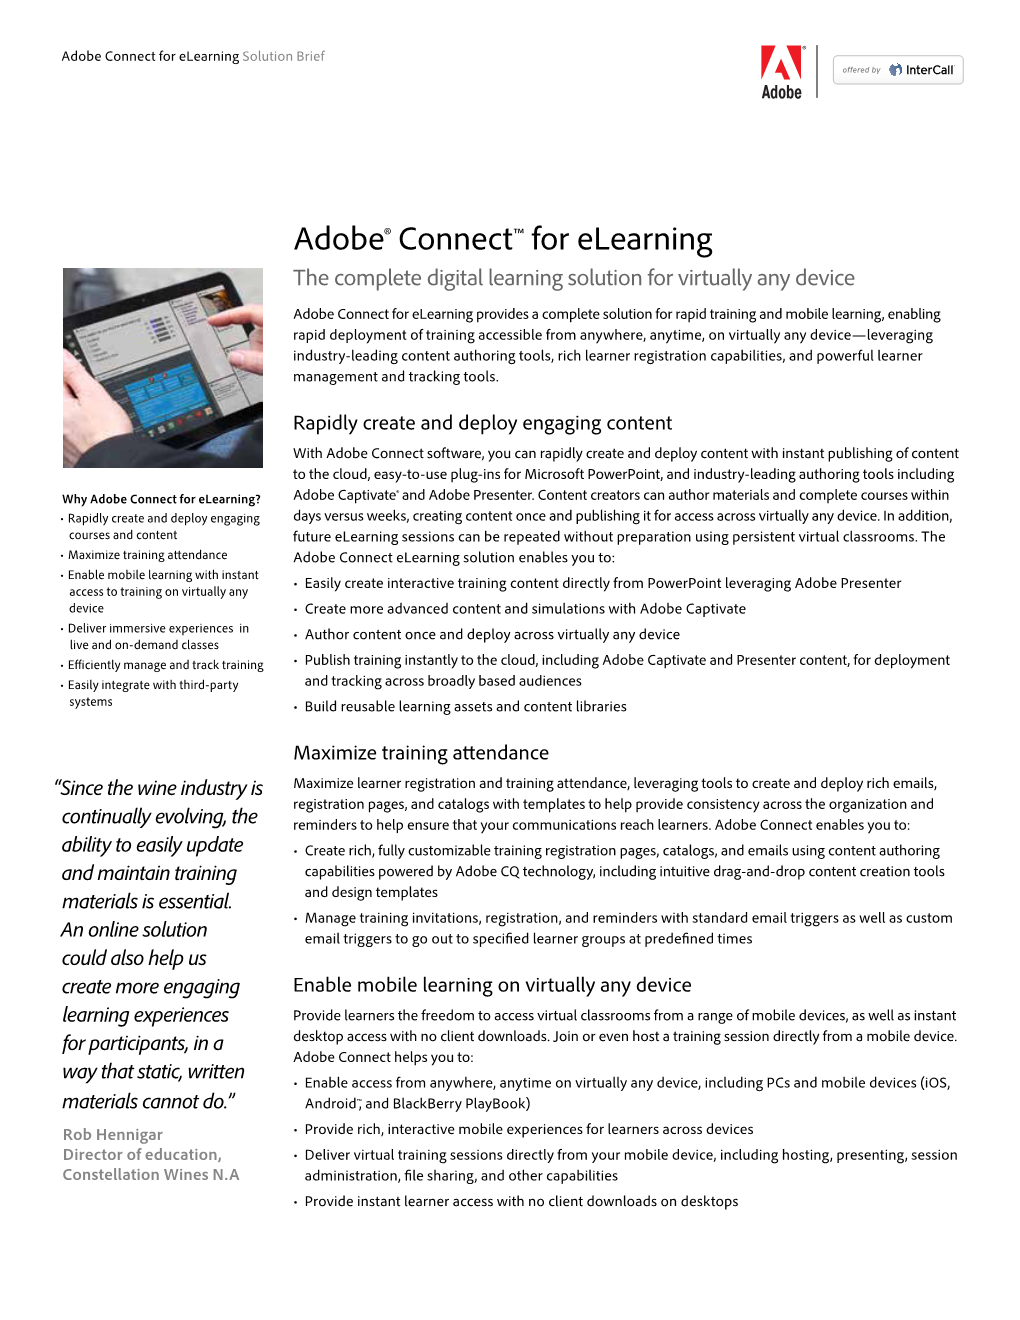 Adobe® Connect™ for Elearning the Complete Digital Learning Solution for Virtually Any Device